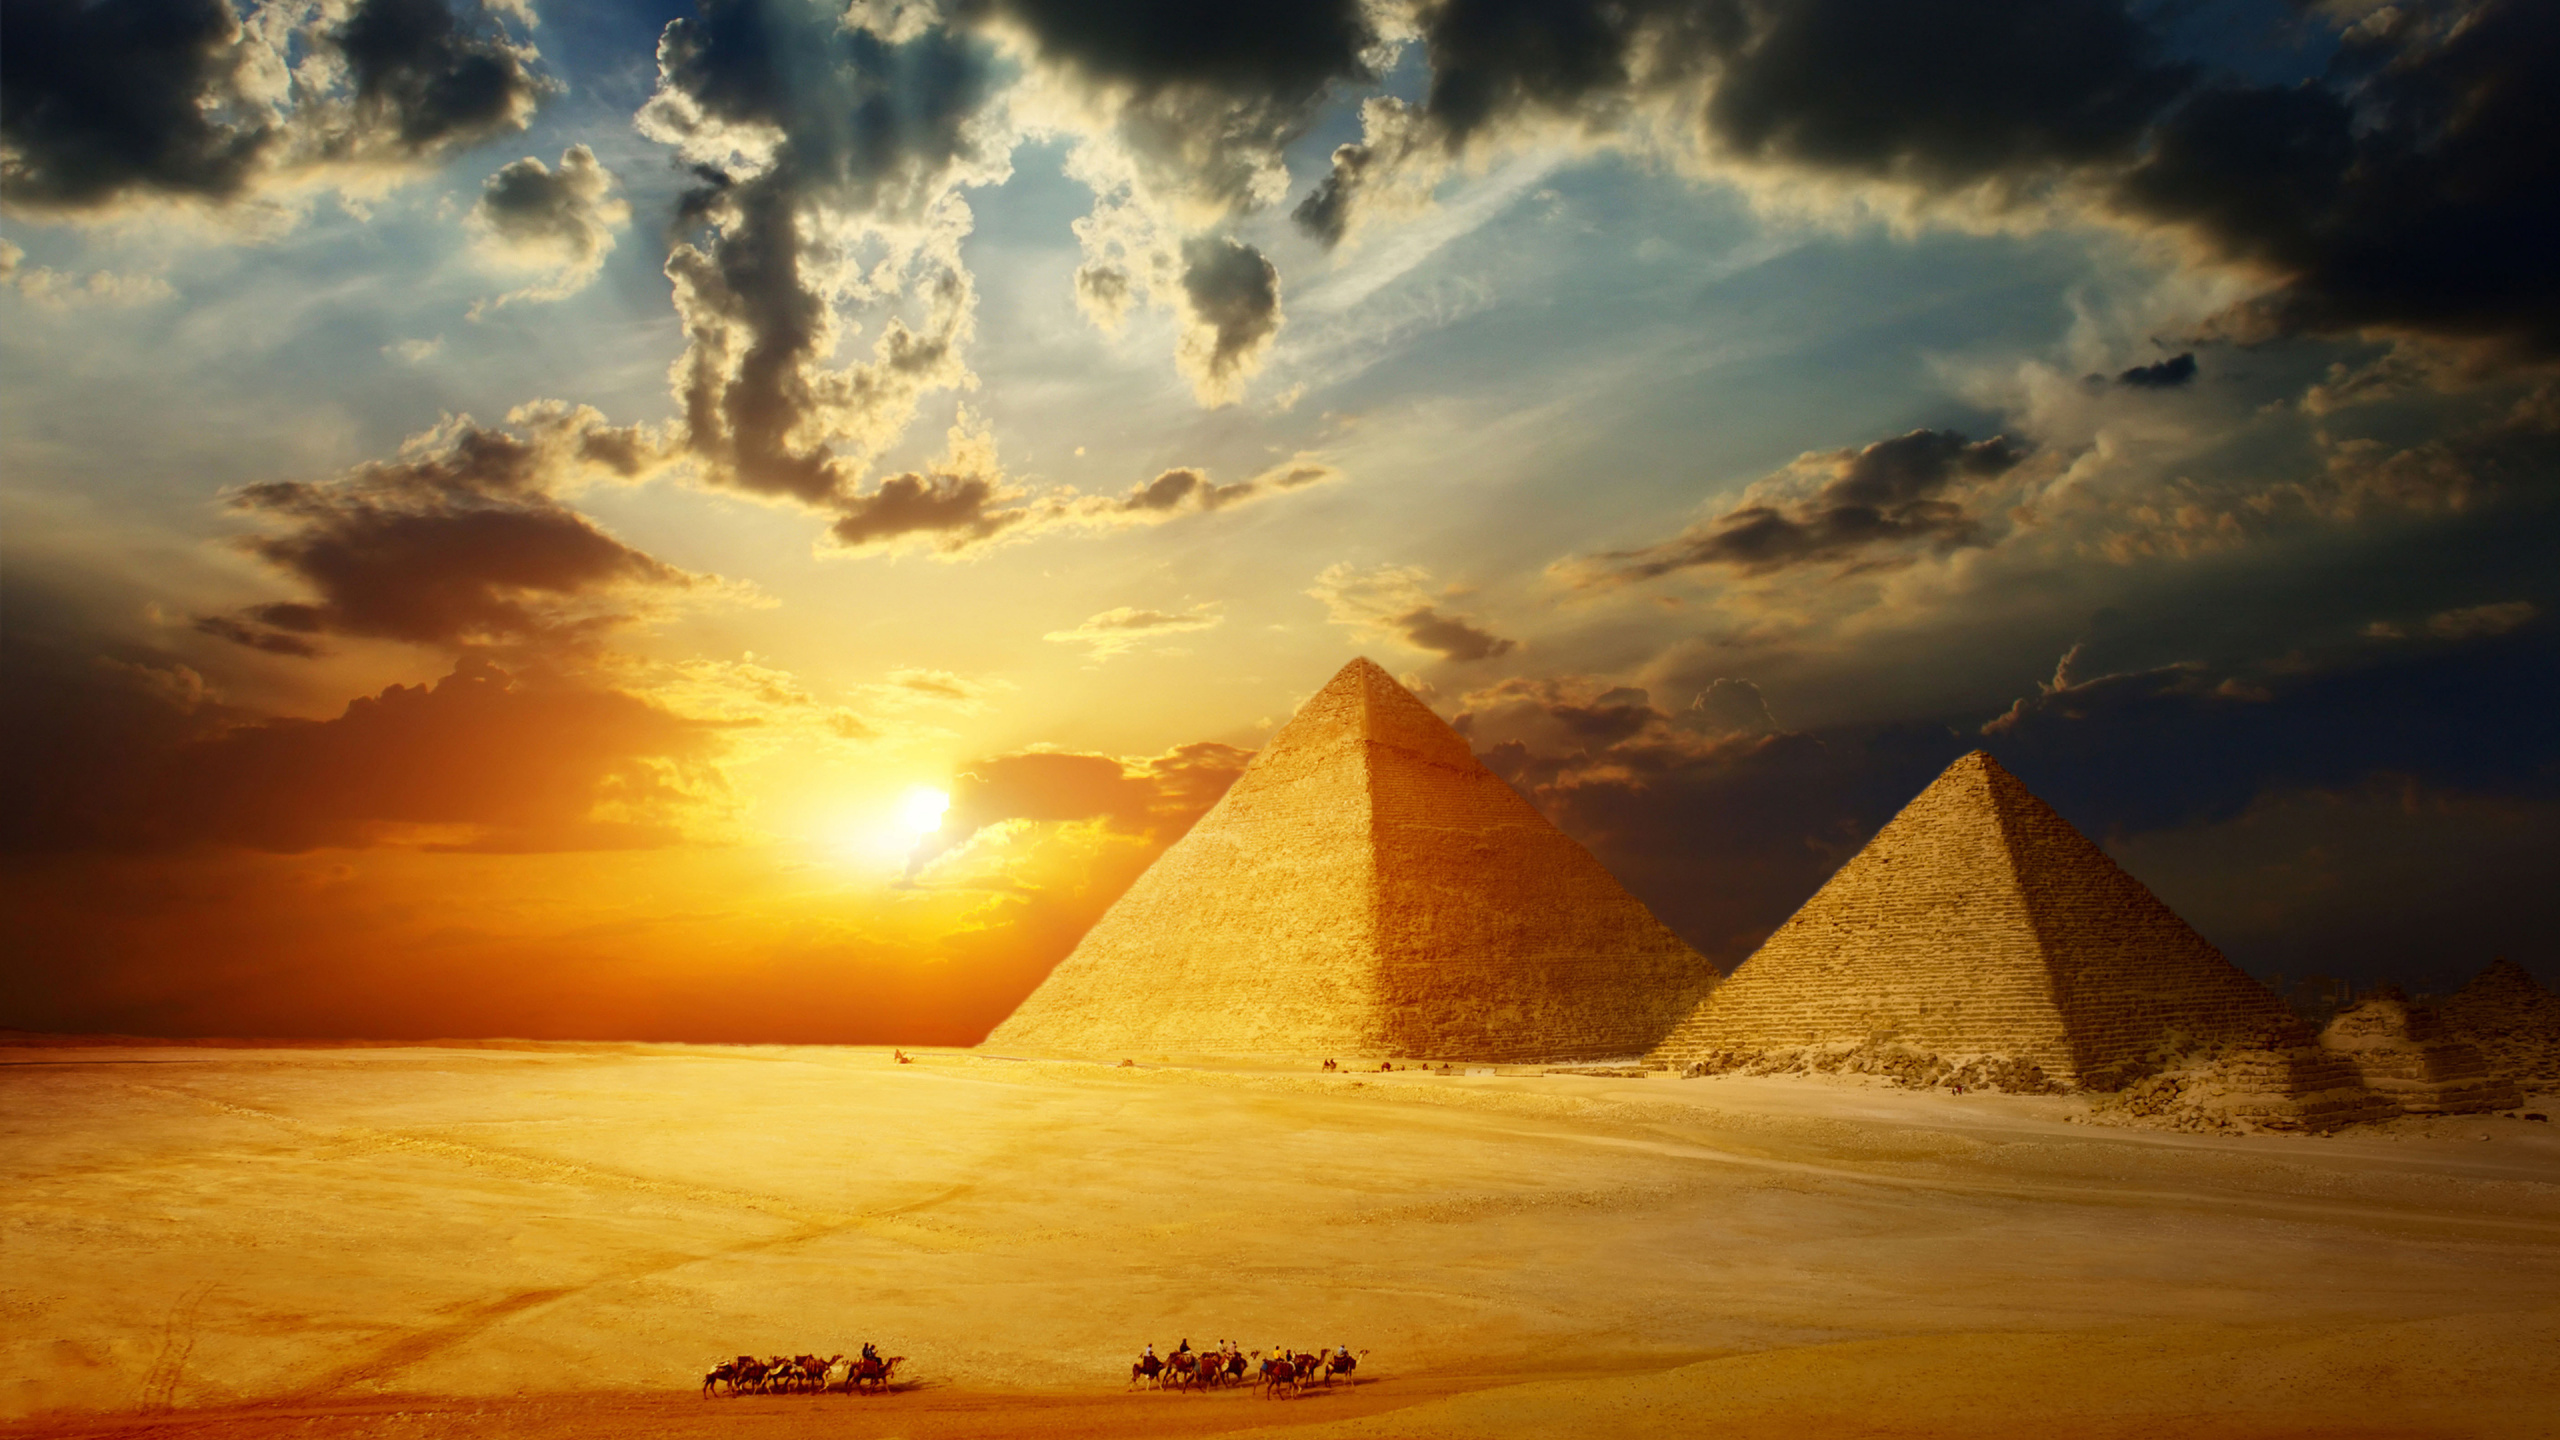 Brown Pyramid on White Sand During Sunset. Wallpaper in 2560x1440 Resolution